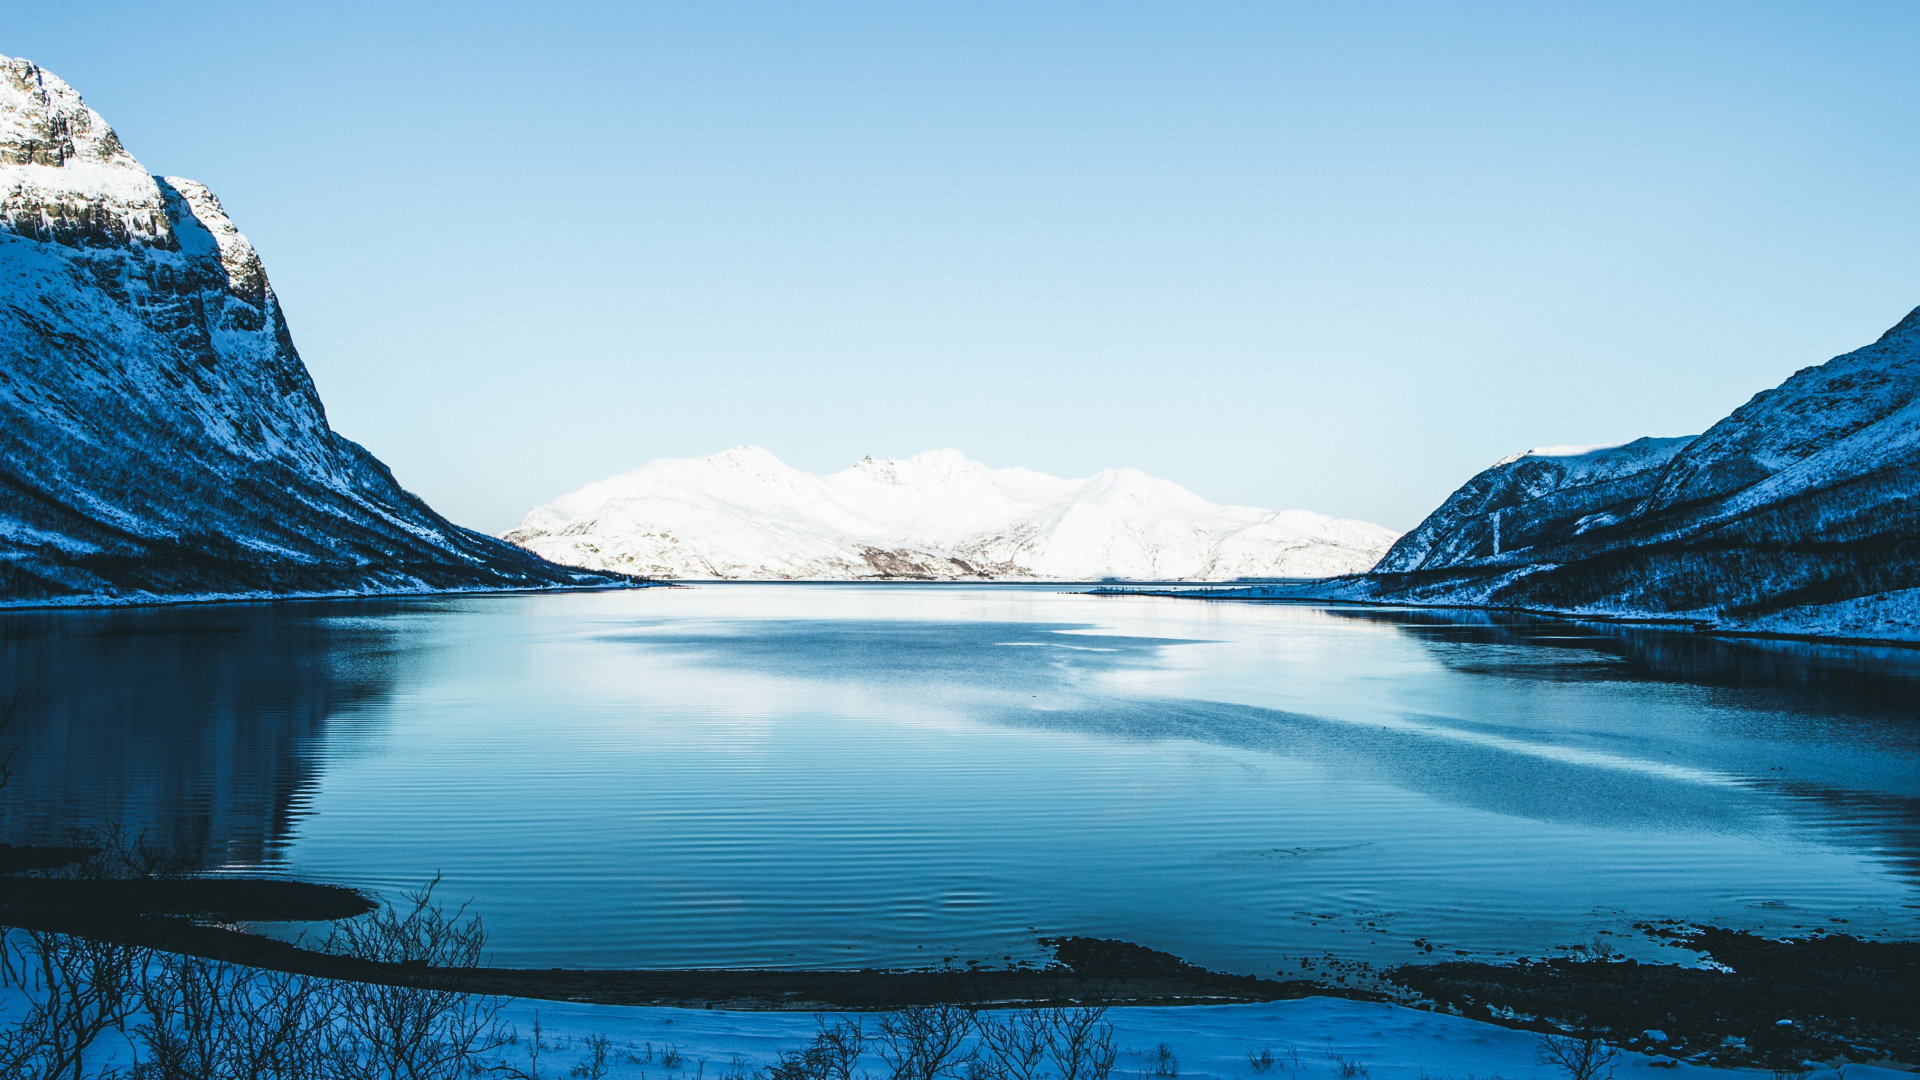 Winter, Nature, Body of Water, Natural Landscape, Blue. Wallpaper in 1920x1080 Resolution